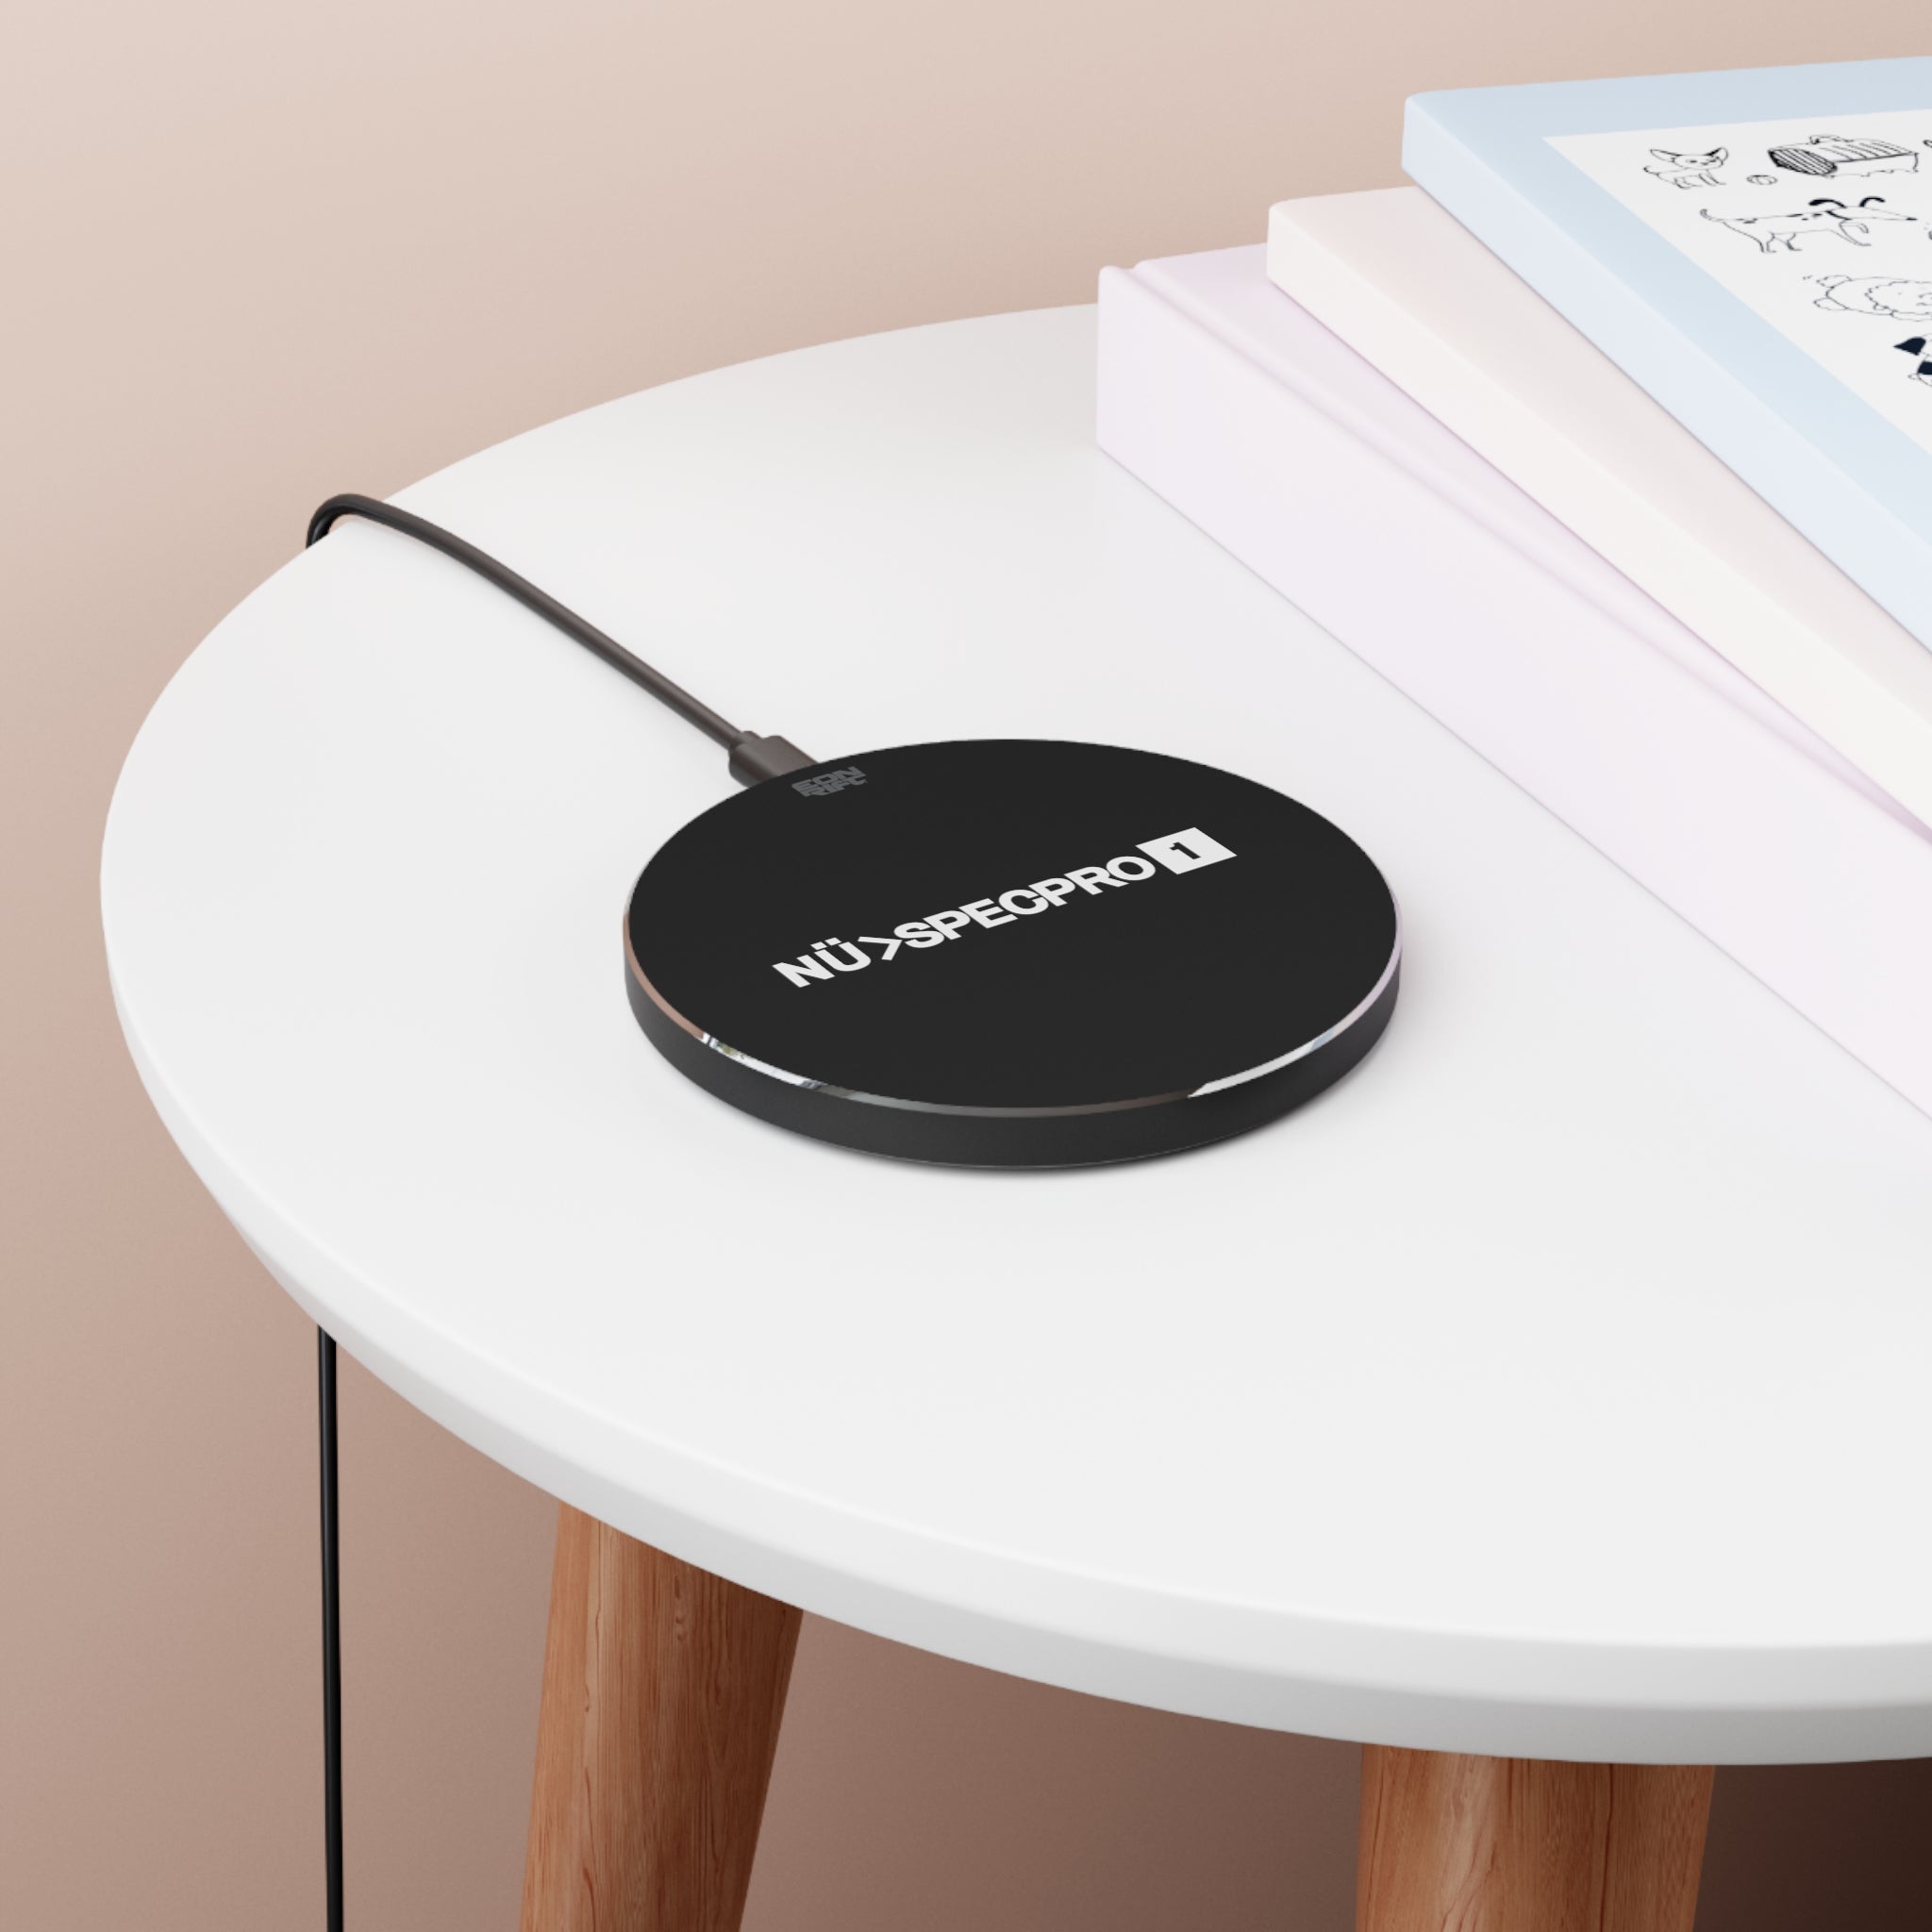 NUSPECPRO Wireless Charger